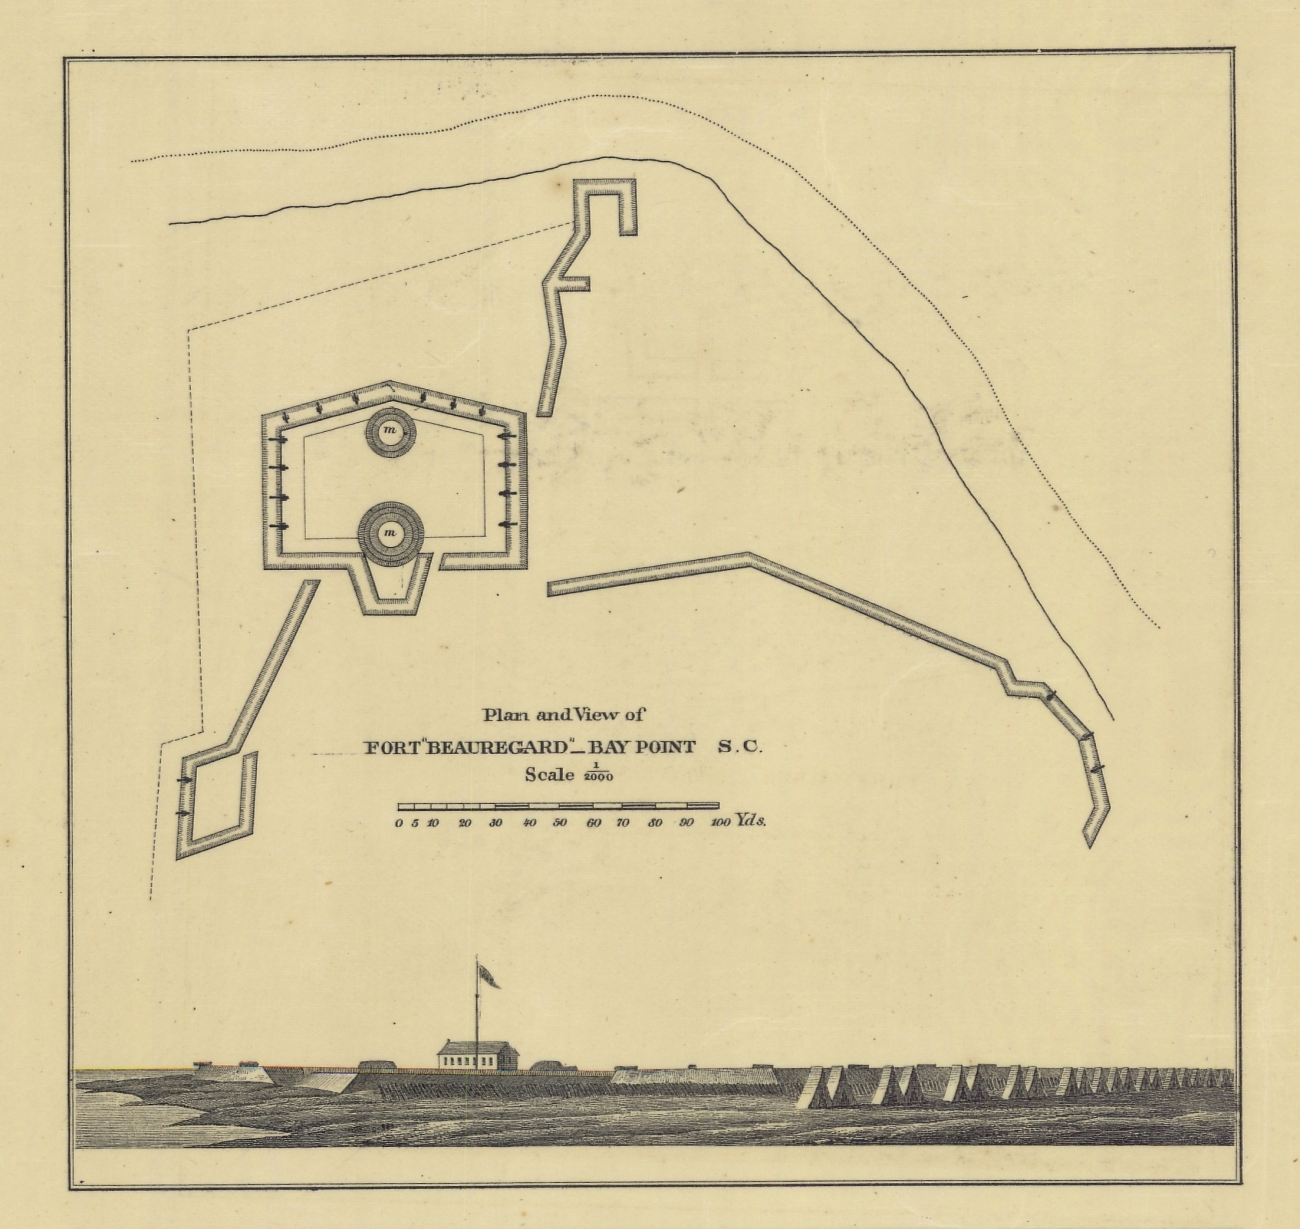 Published plan and view of Fort Beauregard - Bay Point, S